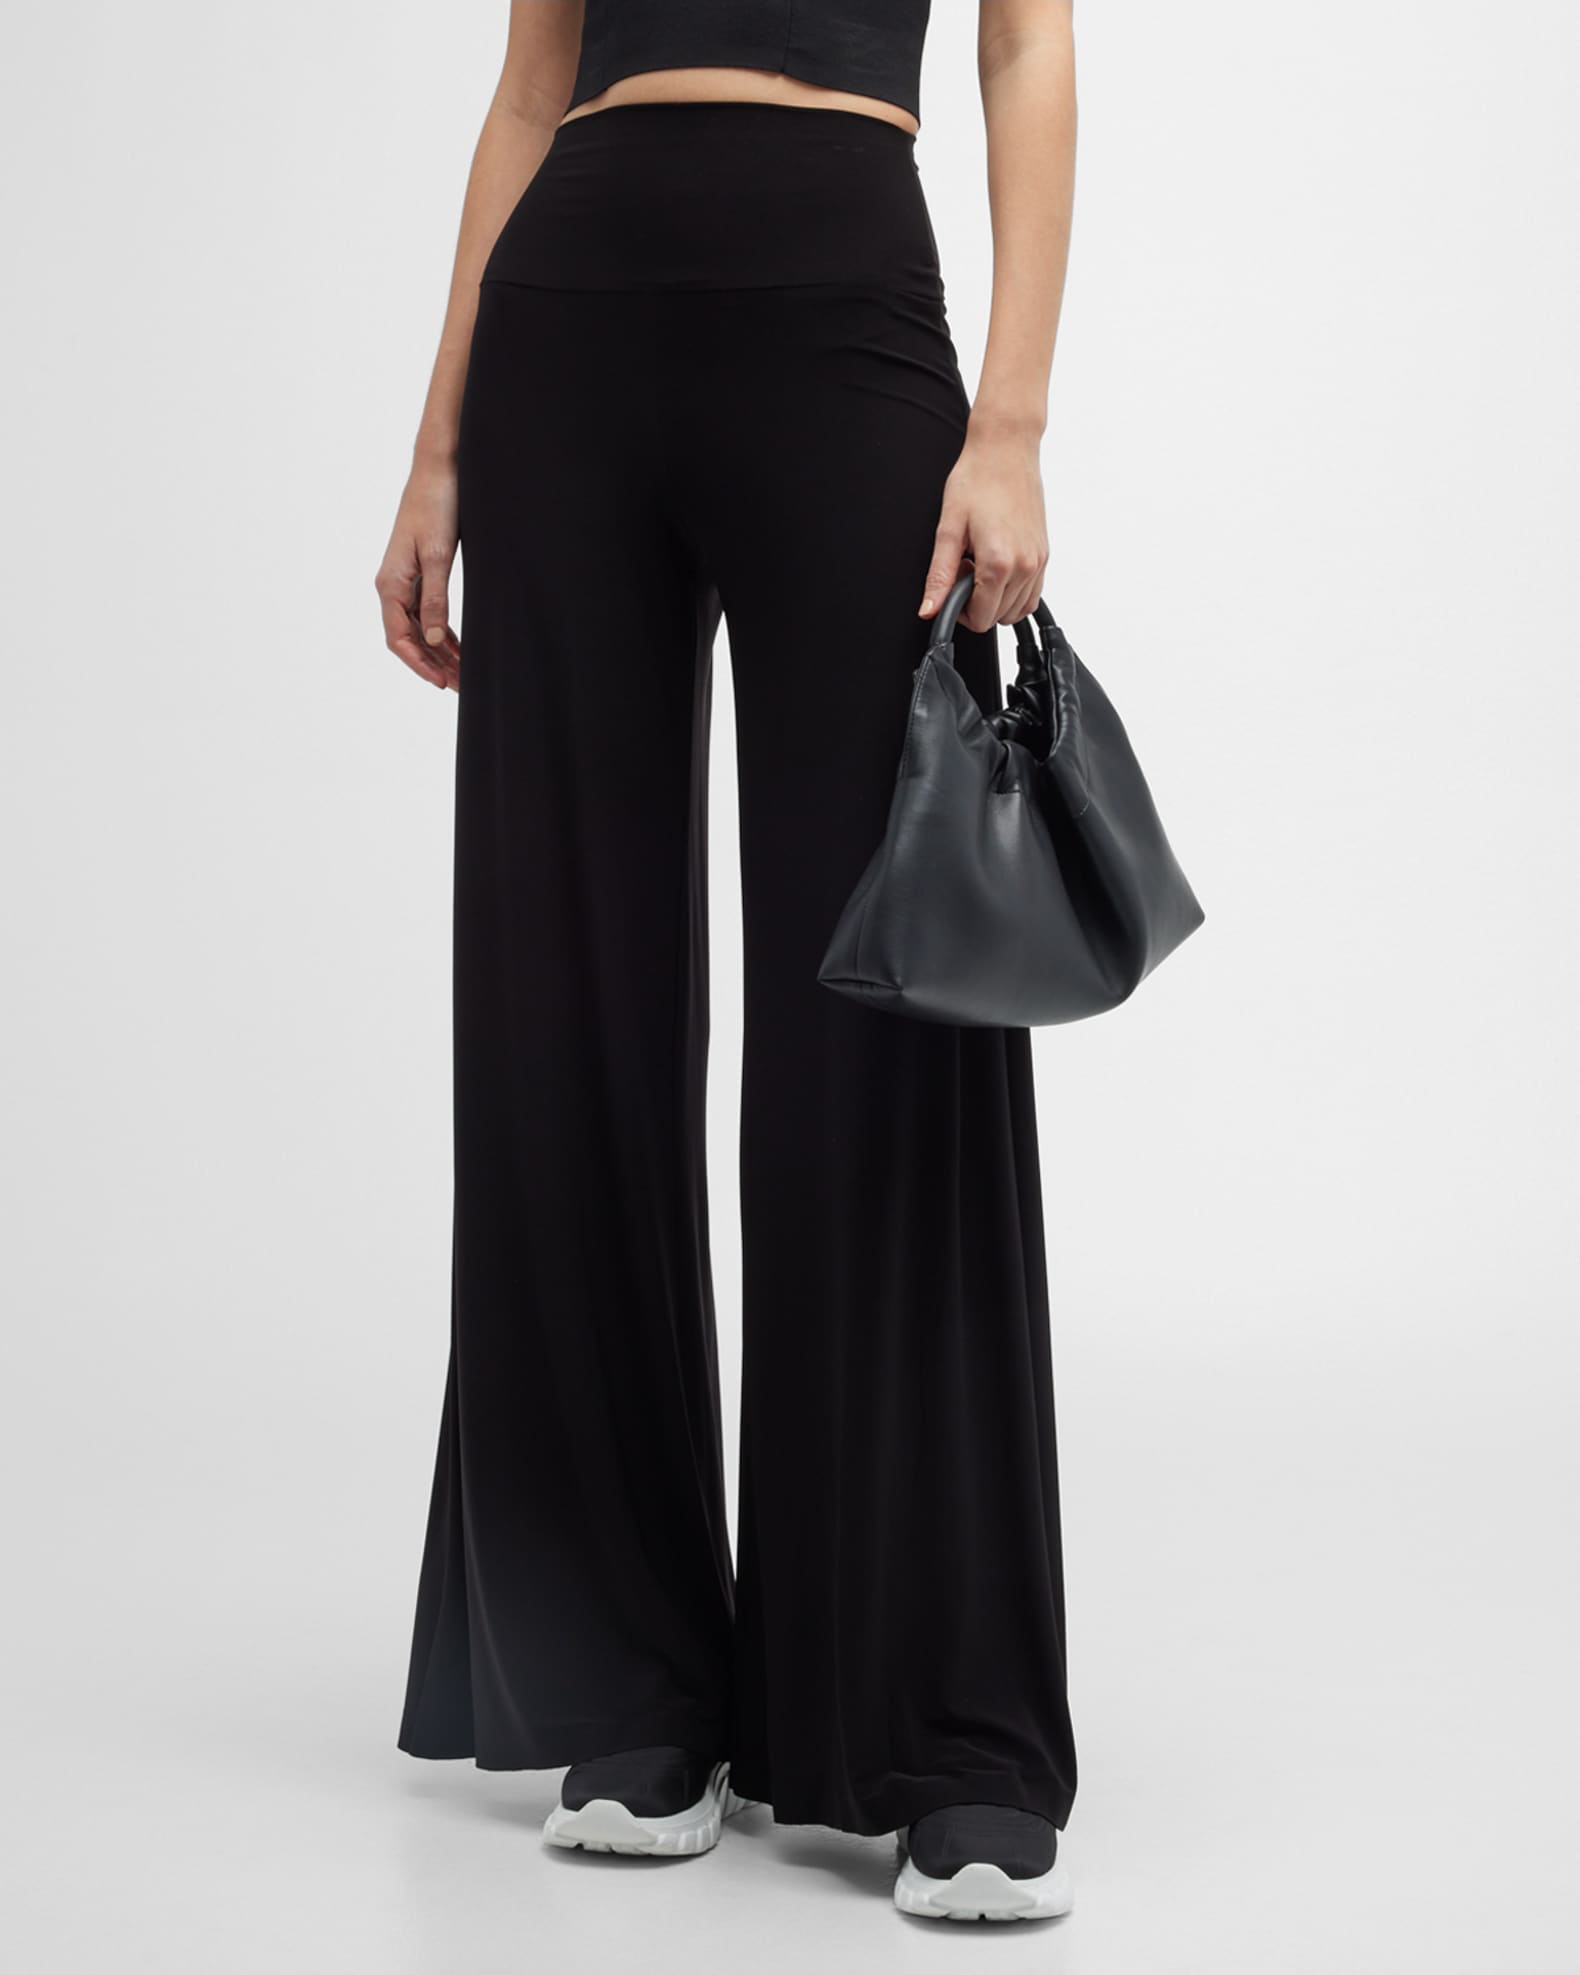 Barbra Pants - Pinstripe Linen Look High Waisted Relaxed Pants in